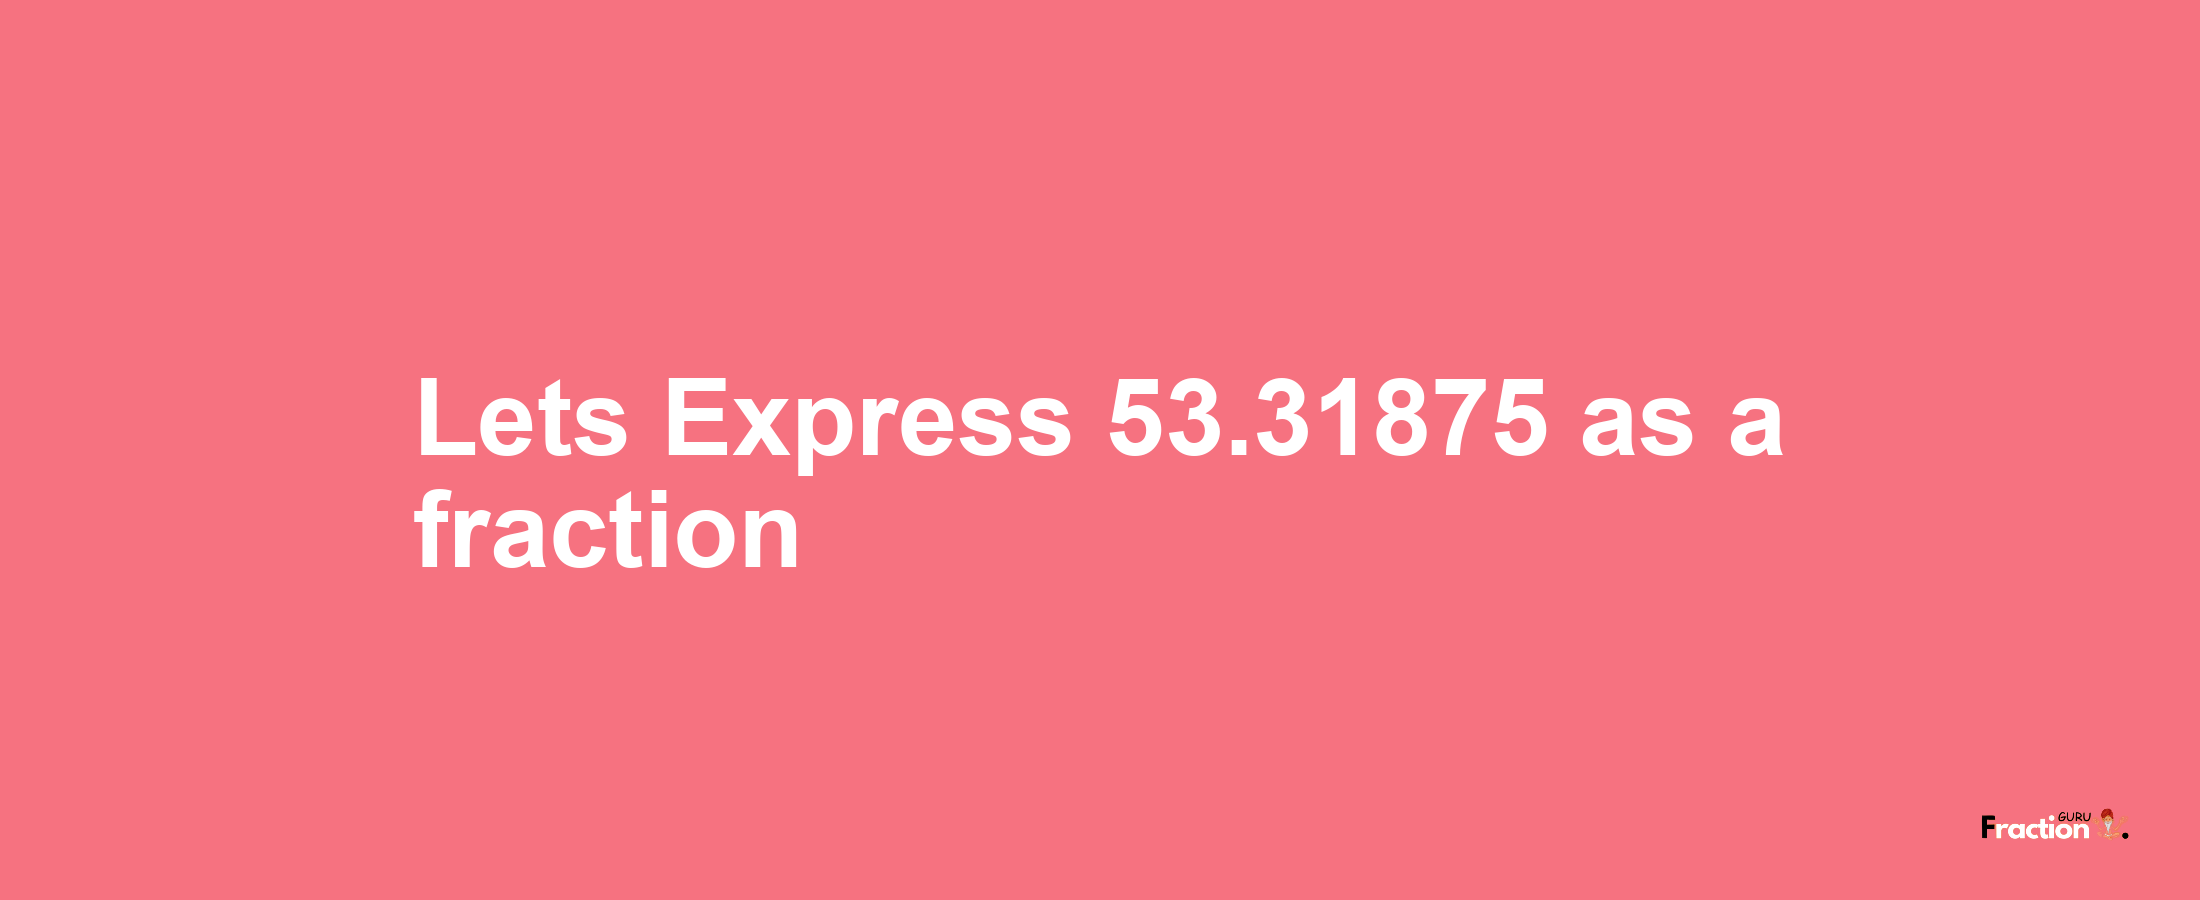 Lets Express 53.31875 as afraction